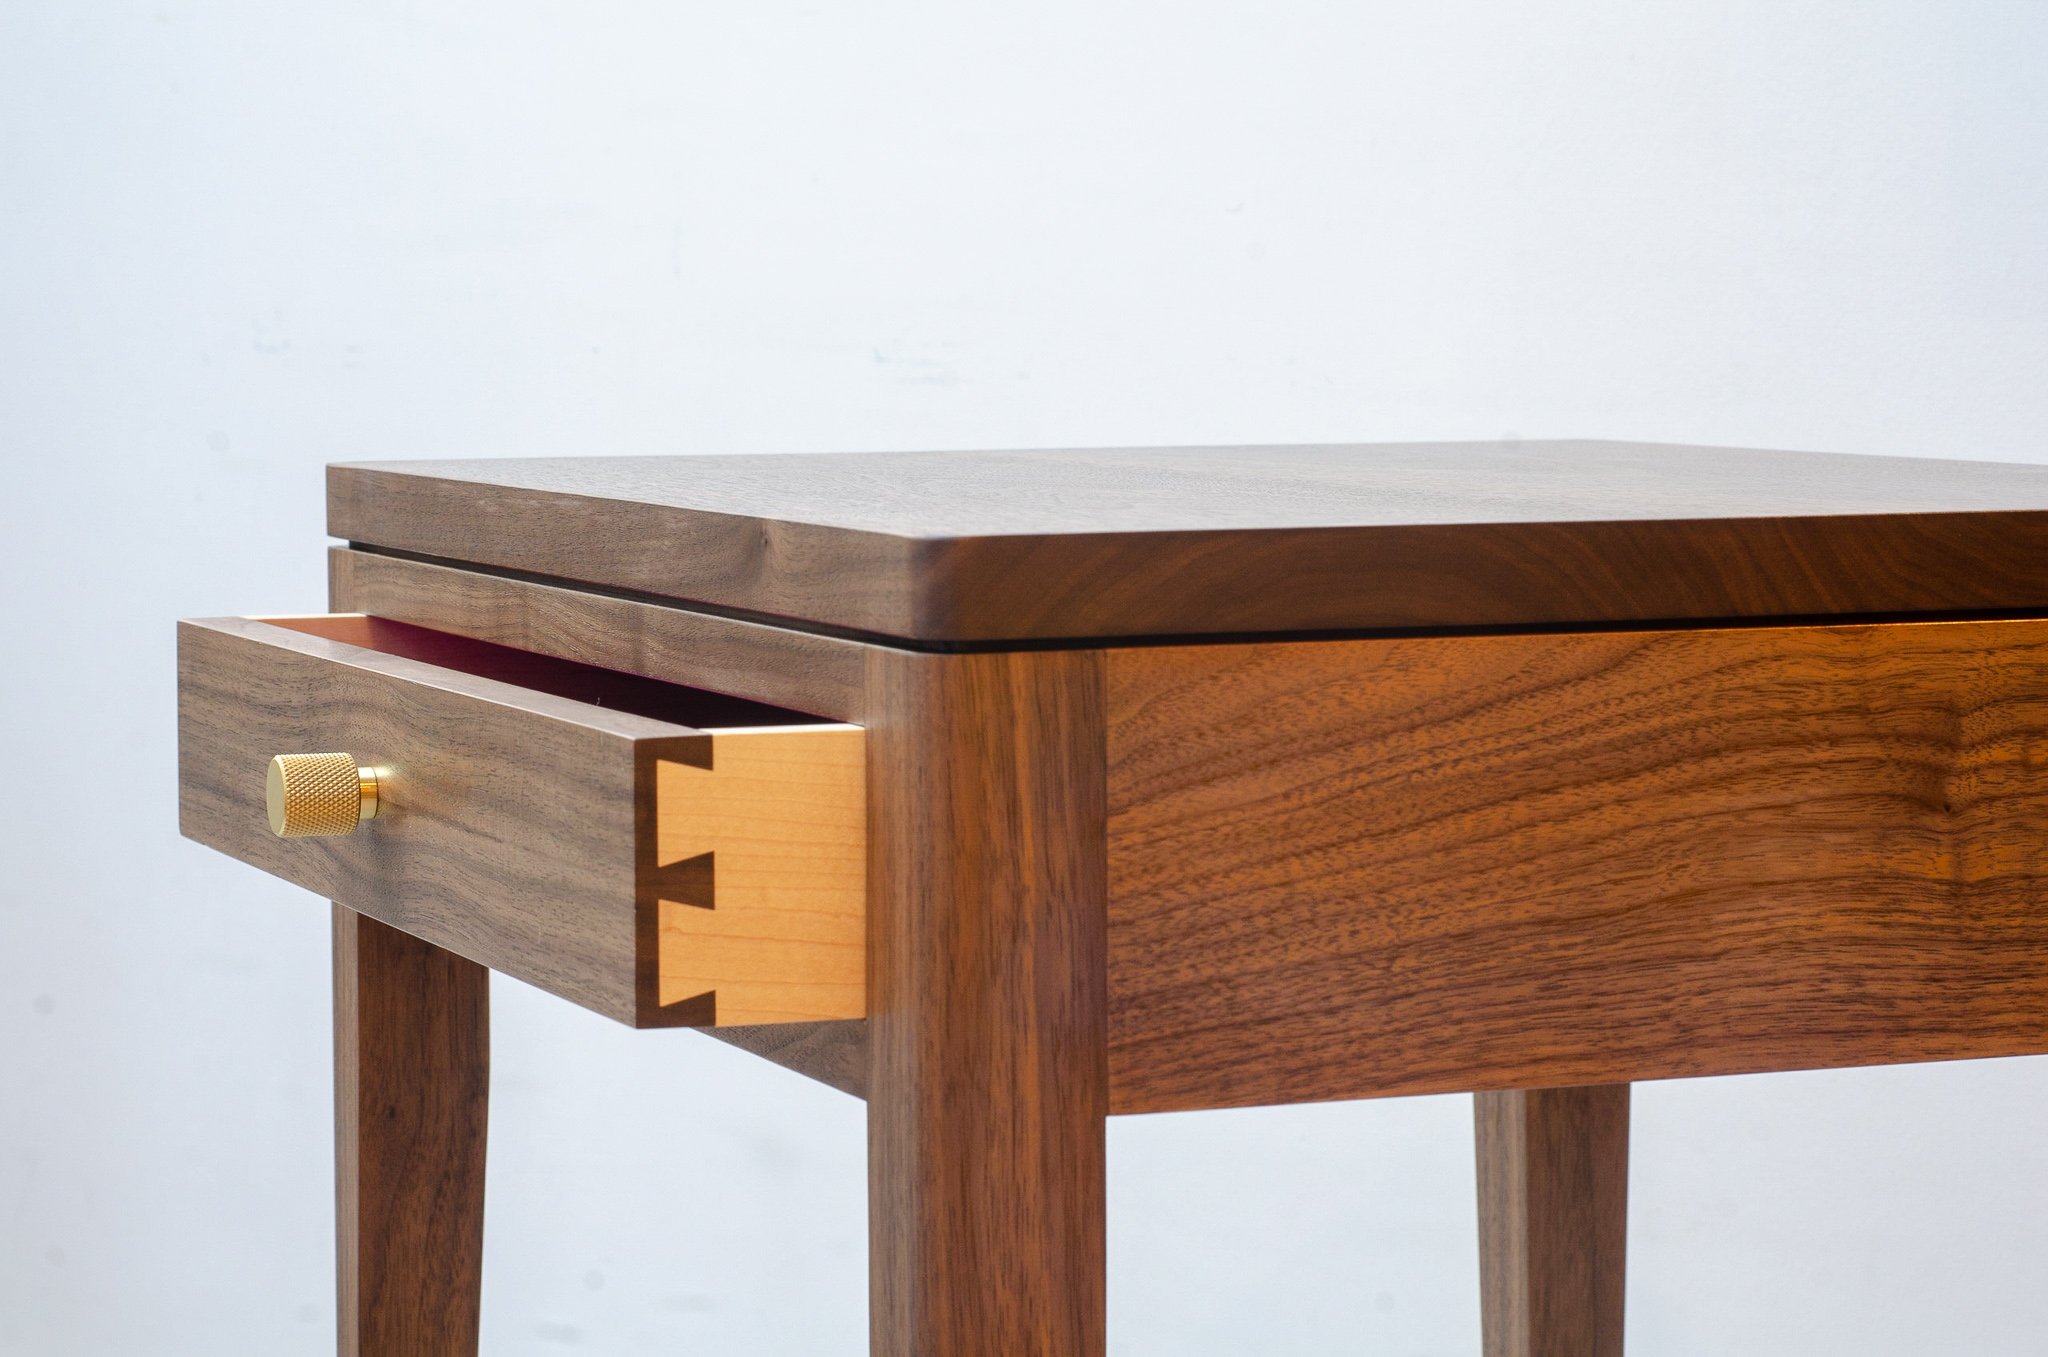 Bedside table in walnut with dovetailed sycamore drawers and brass pulls